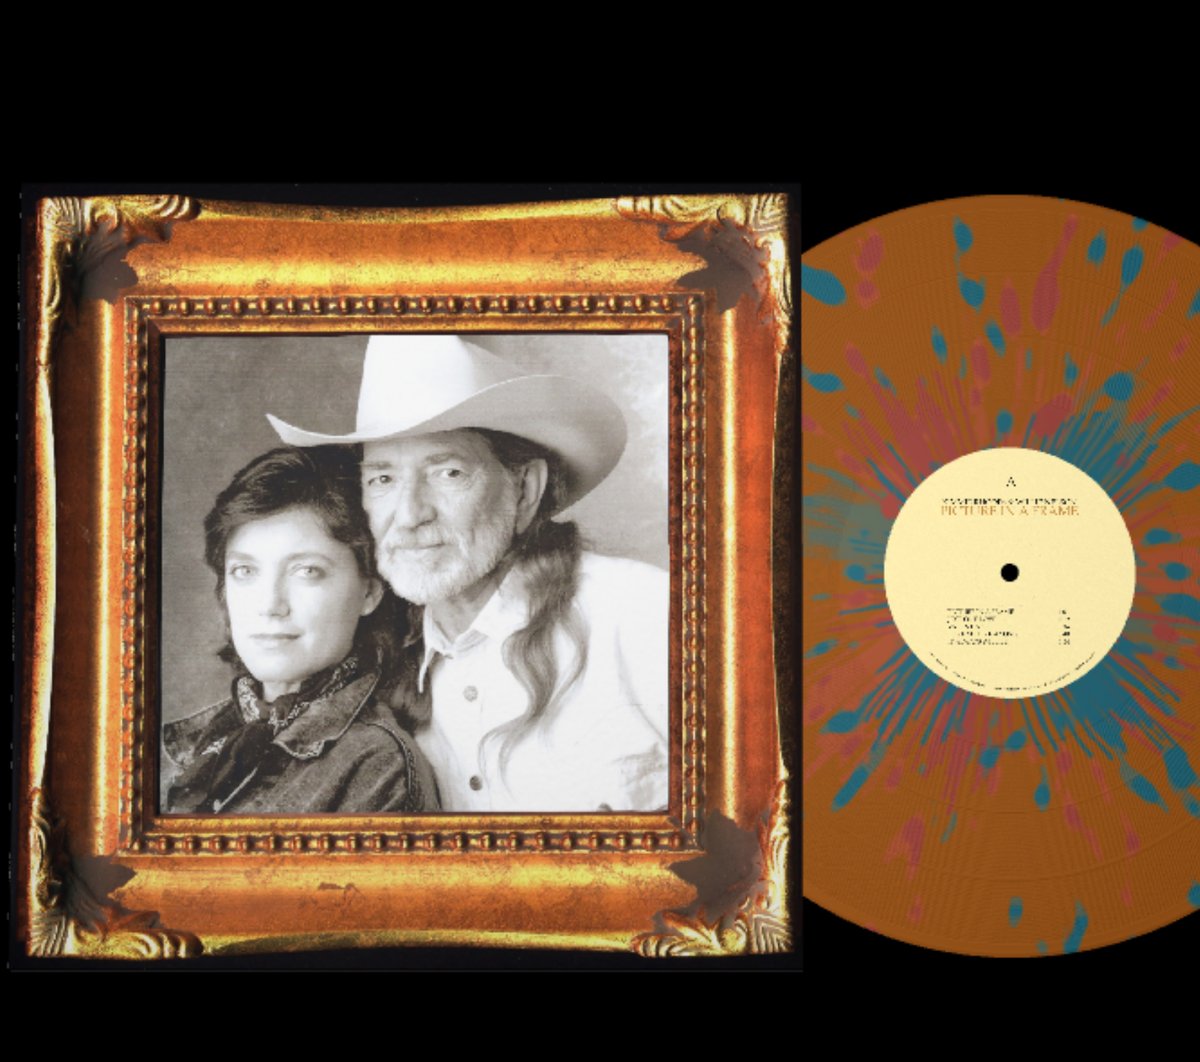 Picture In A Frame - duets by @WillieNelson and Kimmie Rhodes FIRT TIME EVER ON VINYL! It's a limited Campaign with only 29 days left! Please click here to pre-order and HELP US MEET OUR GOAL! > bit.ly/3sfLDKH